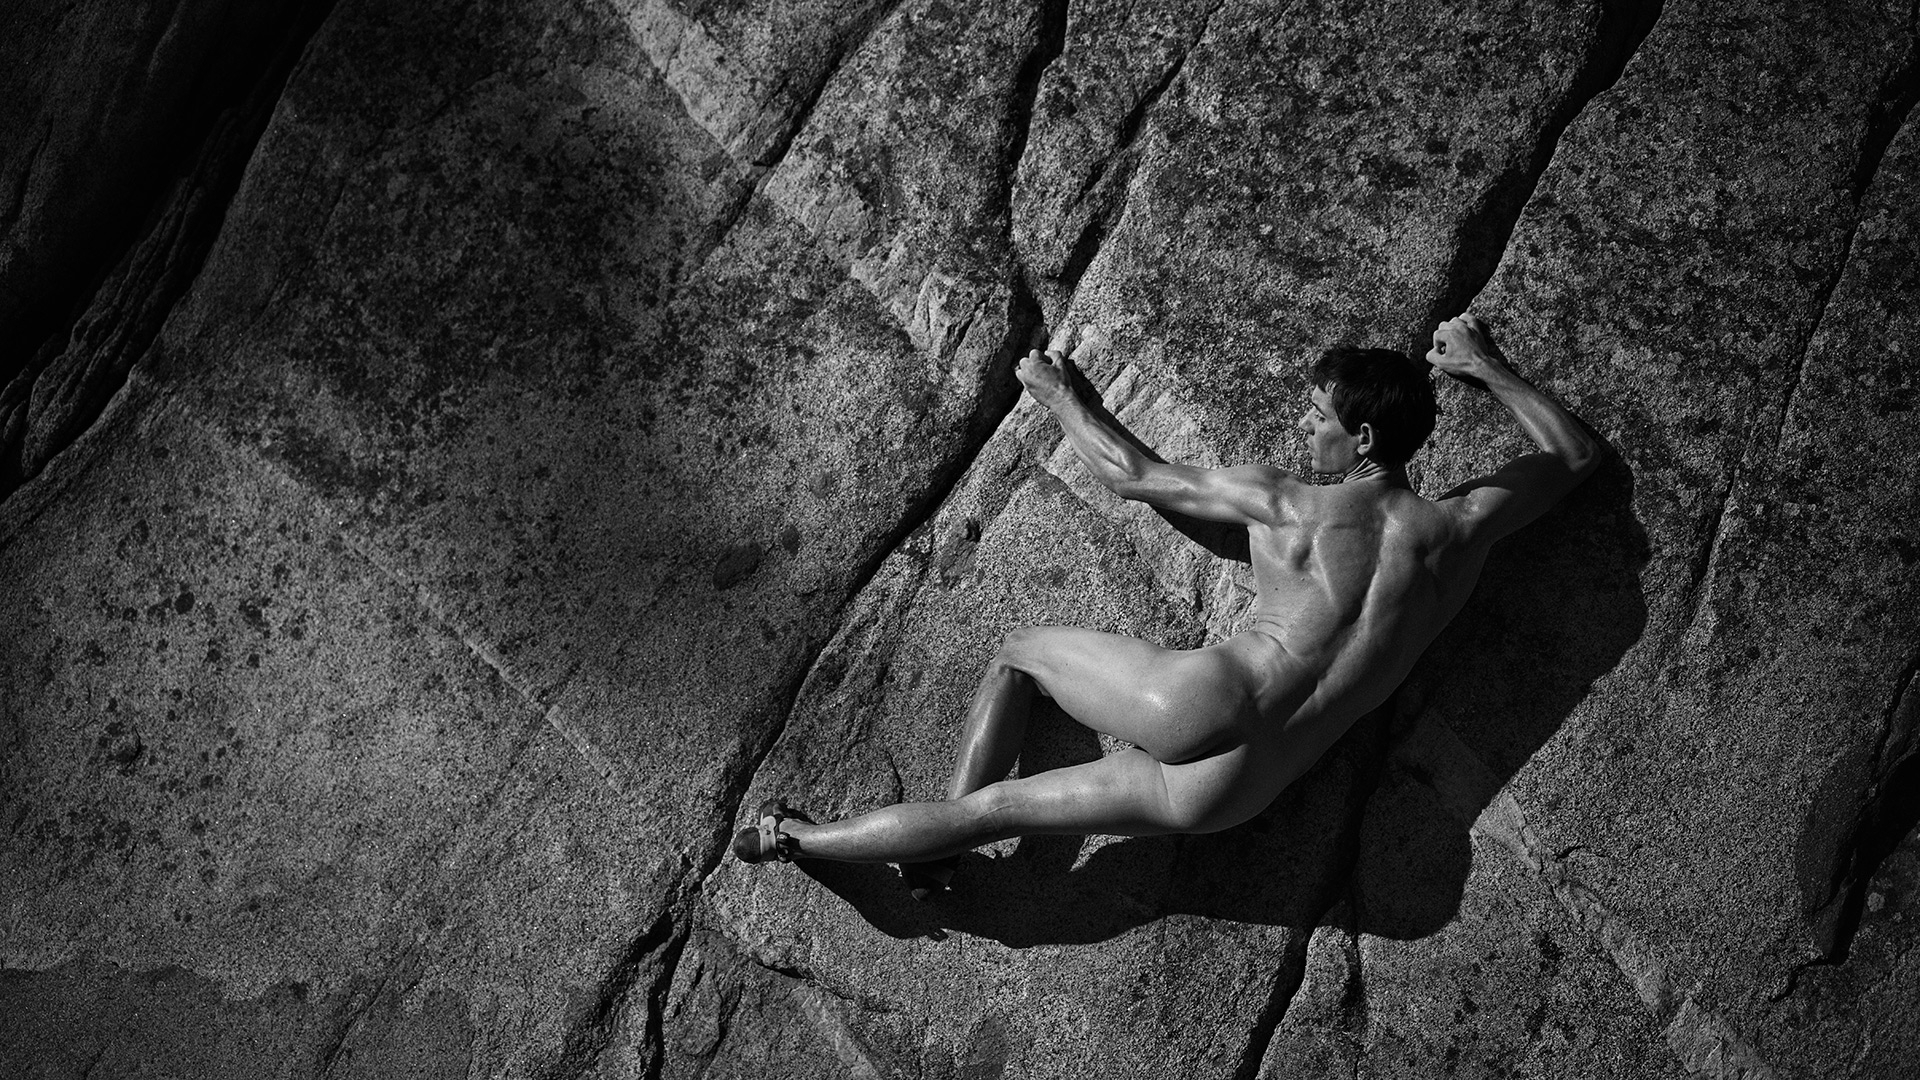 Alex Honnold for ESPNs Body Issue